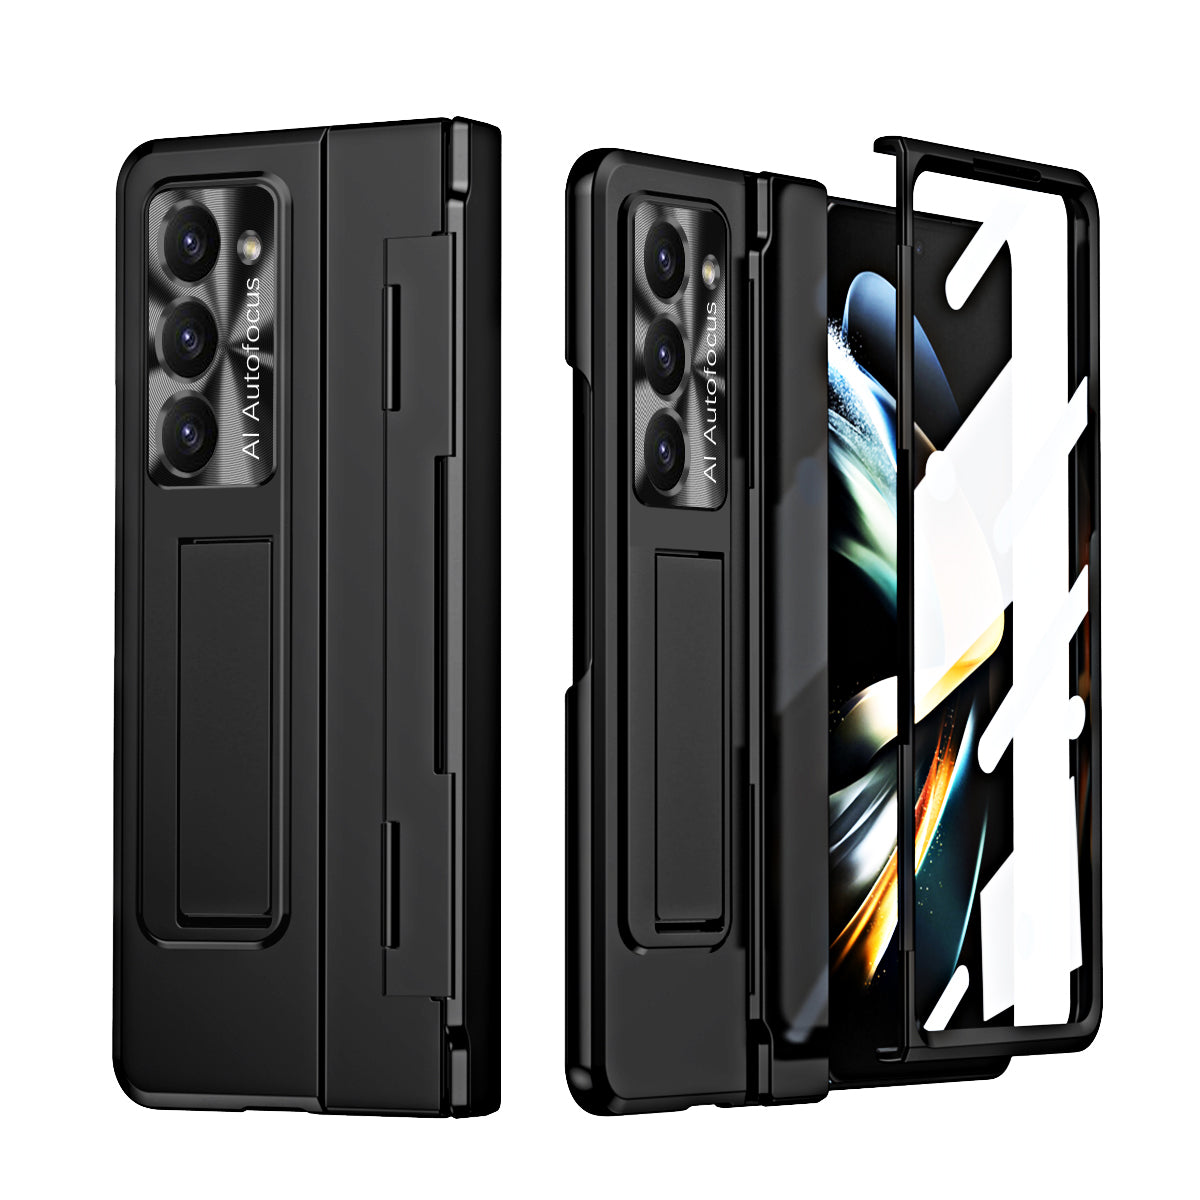 Golden Armor Hinge Magnetic Bracket Protective Phone Case With Front Protection Film For Samsung Galaxy Z Fold5 Fold4 Fold3 - Mycasety Mycasety